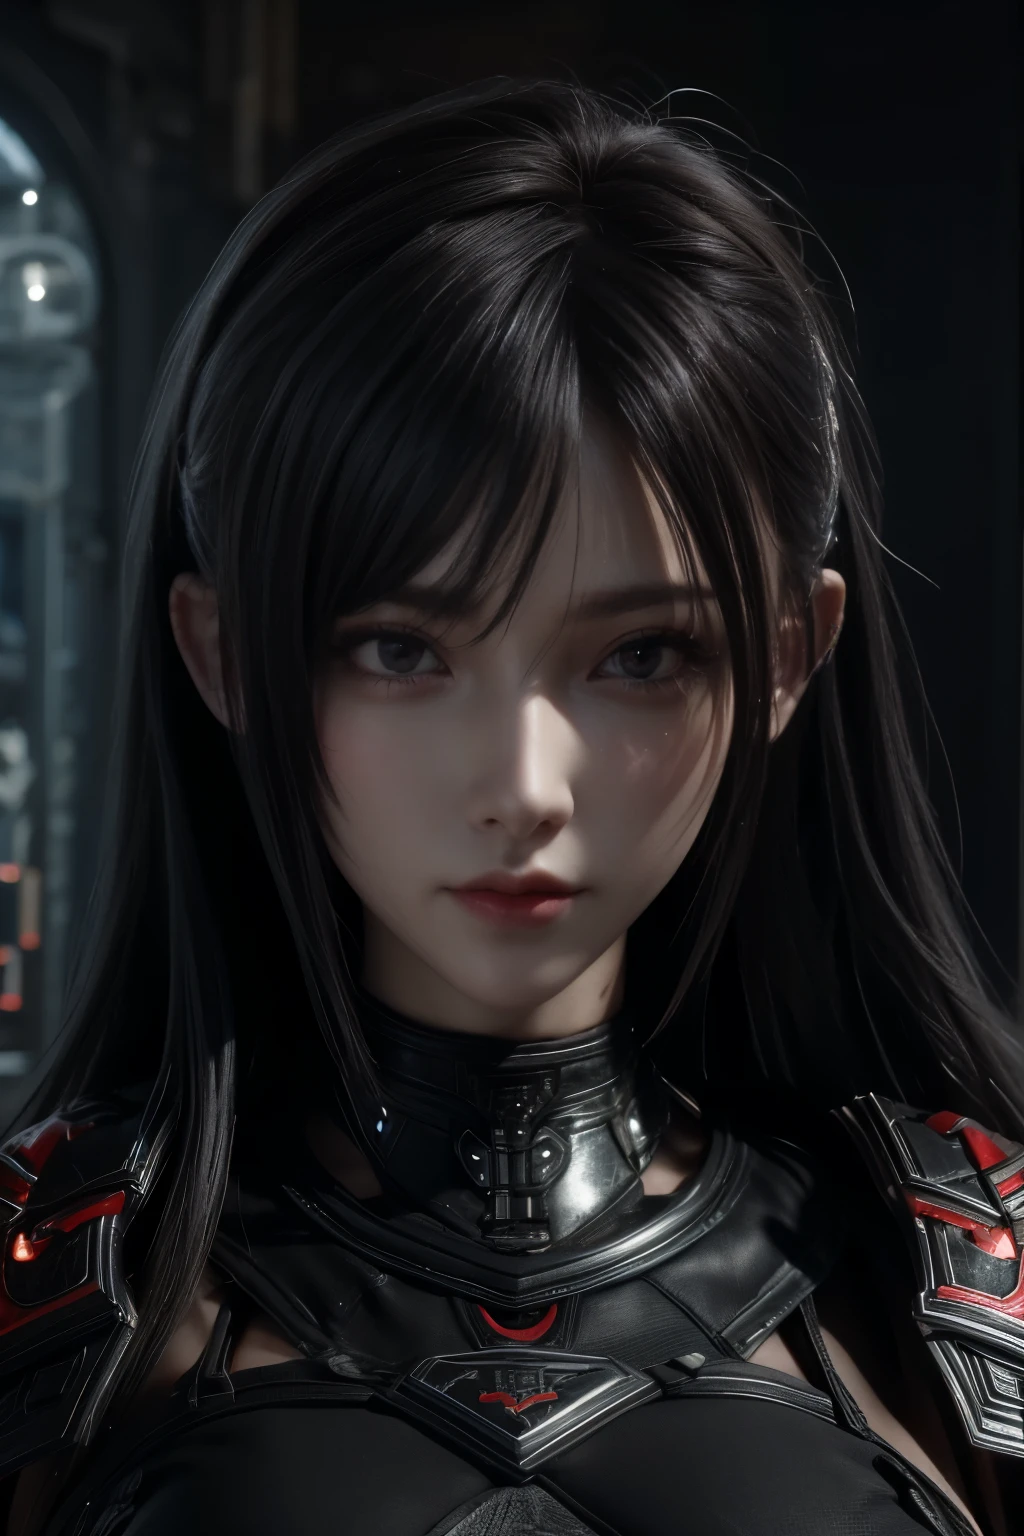 Masterpiece,Game art,The best picture quality,Highest resolution,8K,(Portrait),Unreal Engine 5 rendering works,(Digital Photography),((Portrait Feature:1.5)),
20 year old girl,Short hair details,With long bangs,(The red eye makeup is very meticulous),(With long gray hair:1.4),(Large, full breasts),Elegant and noble,Brave and charming,
(Future armor combined with the characteristics of ancient Chinese armor,Hollow design,Power Armor,The mysterious Eastern runes,A delicate dress pattern,A flash of magic),Warrior of the future,Cyberpunk figures,Background of war,
Movie lights，Ray tracing，Game CG，((3D Unreal Engine))，OC rendering reflection pattern